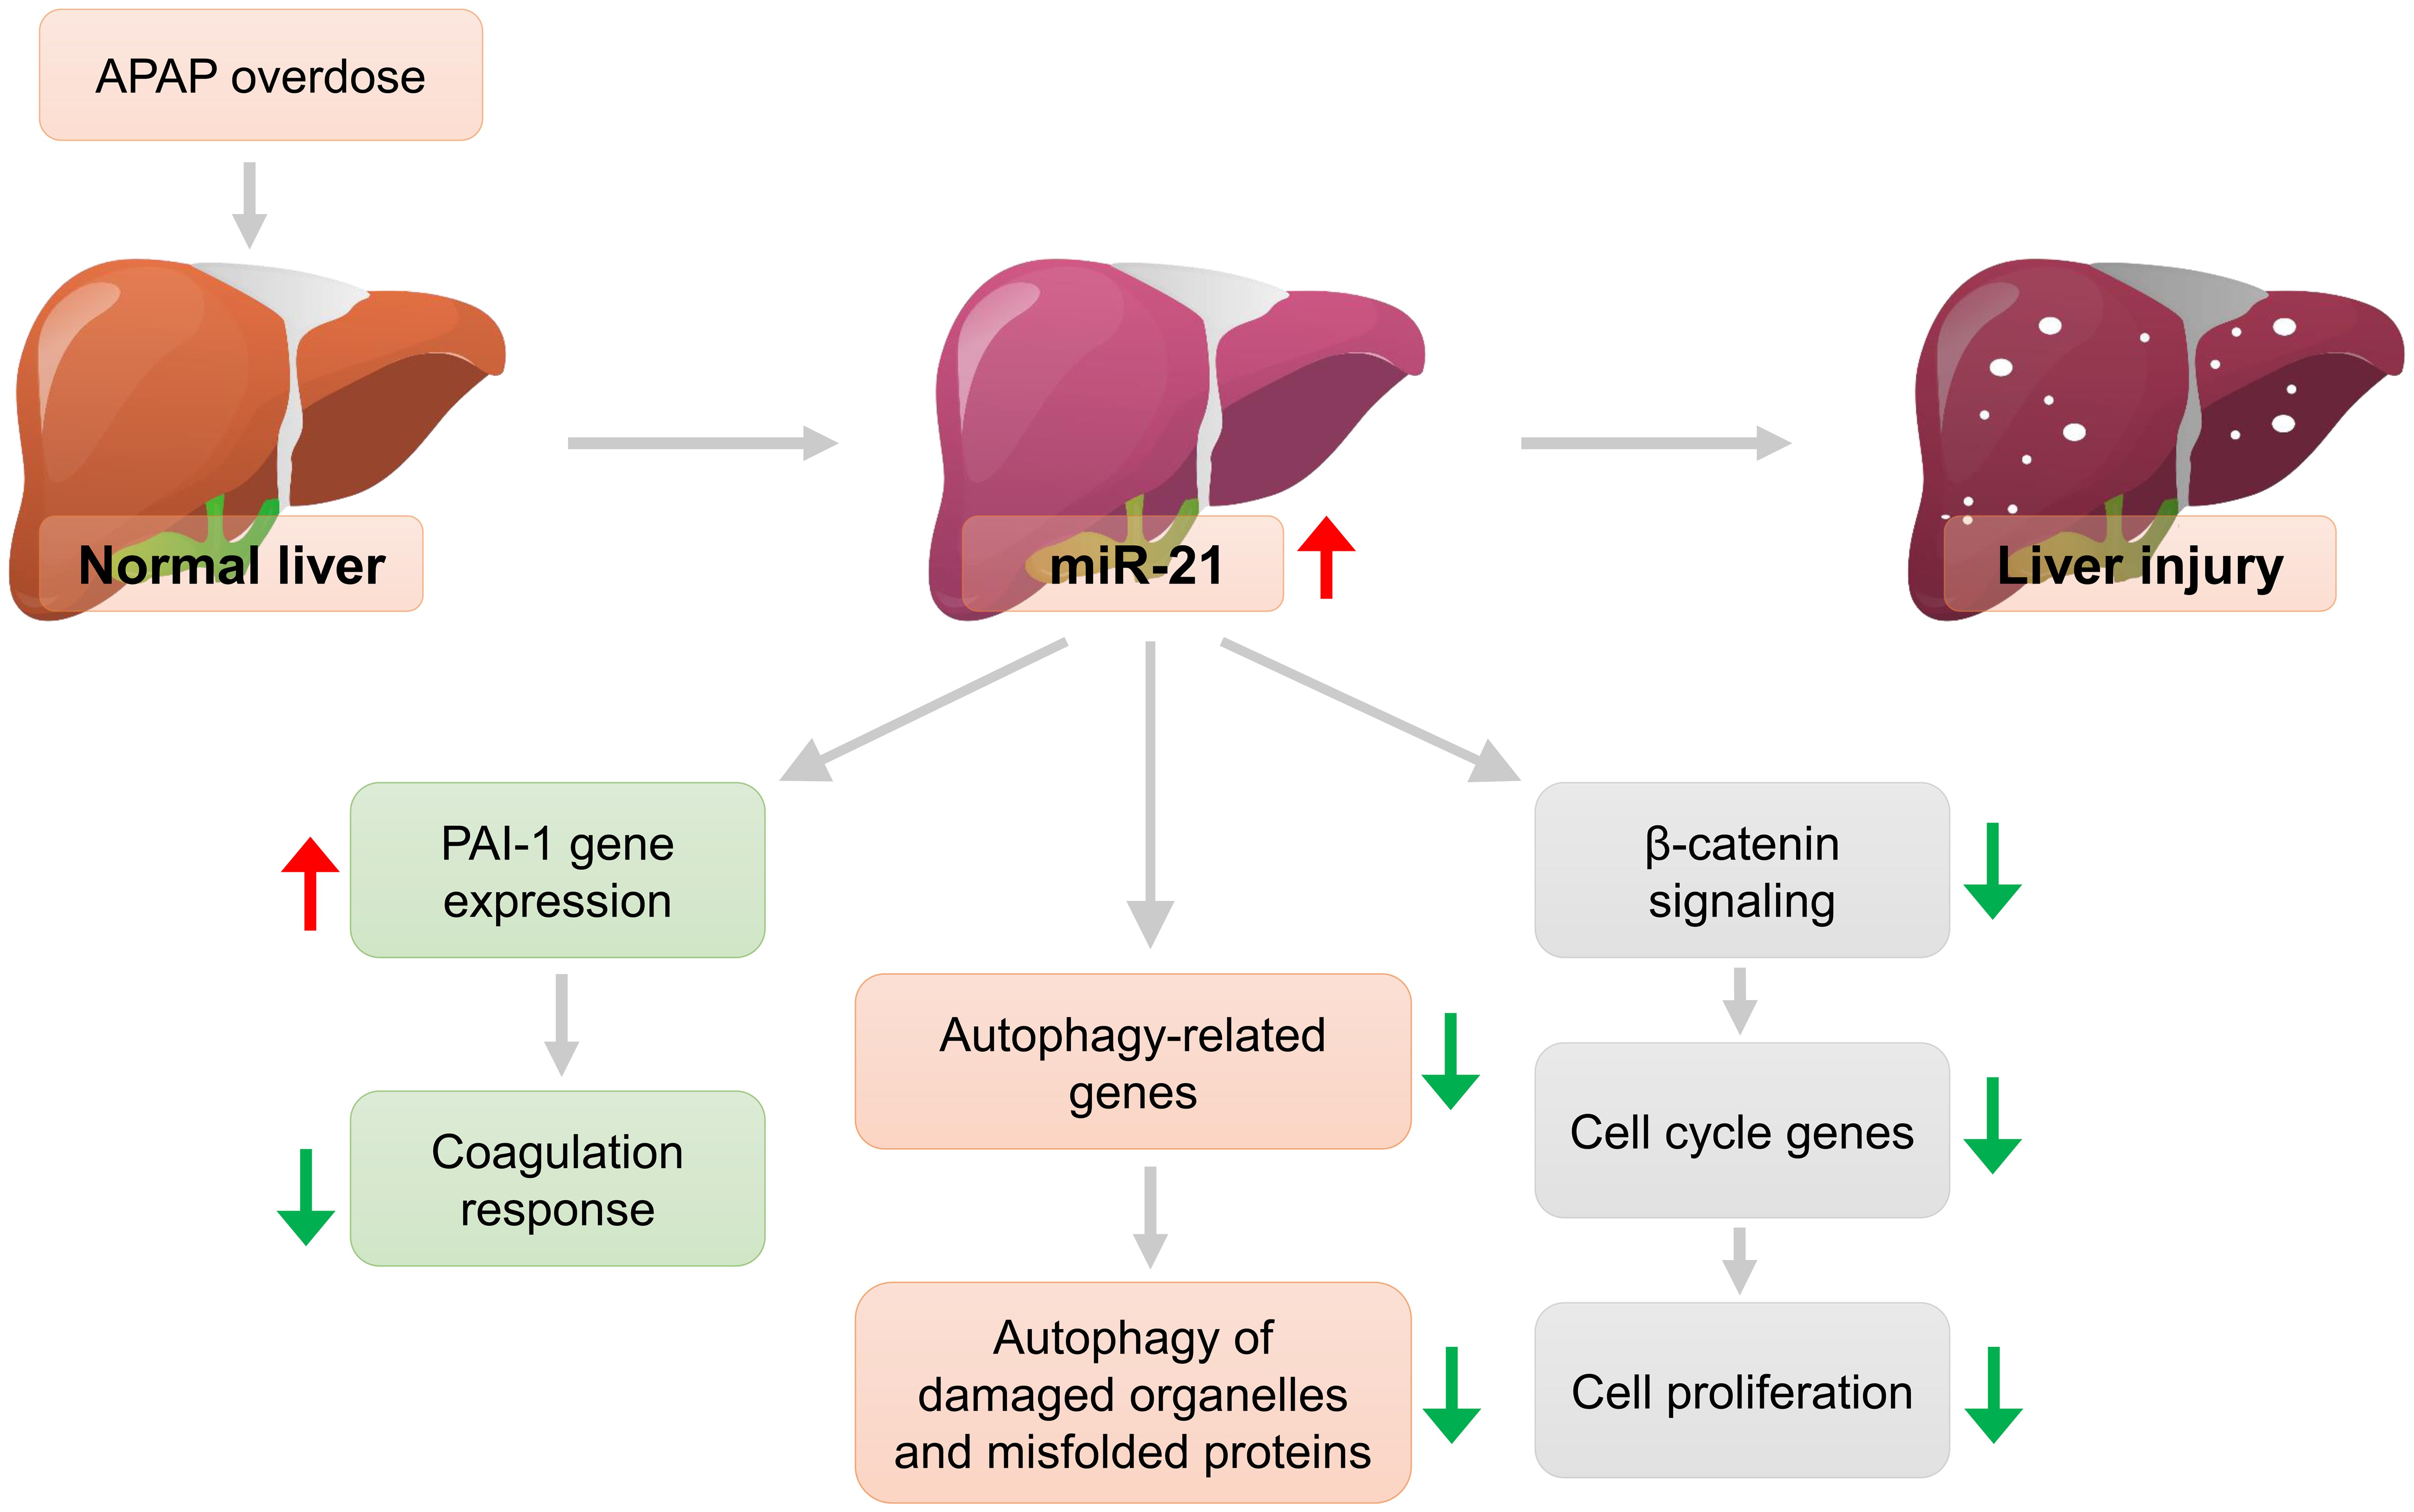 Role of miRNA21 in APAP-induced liver injury.